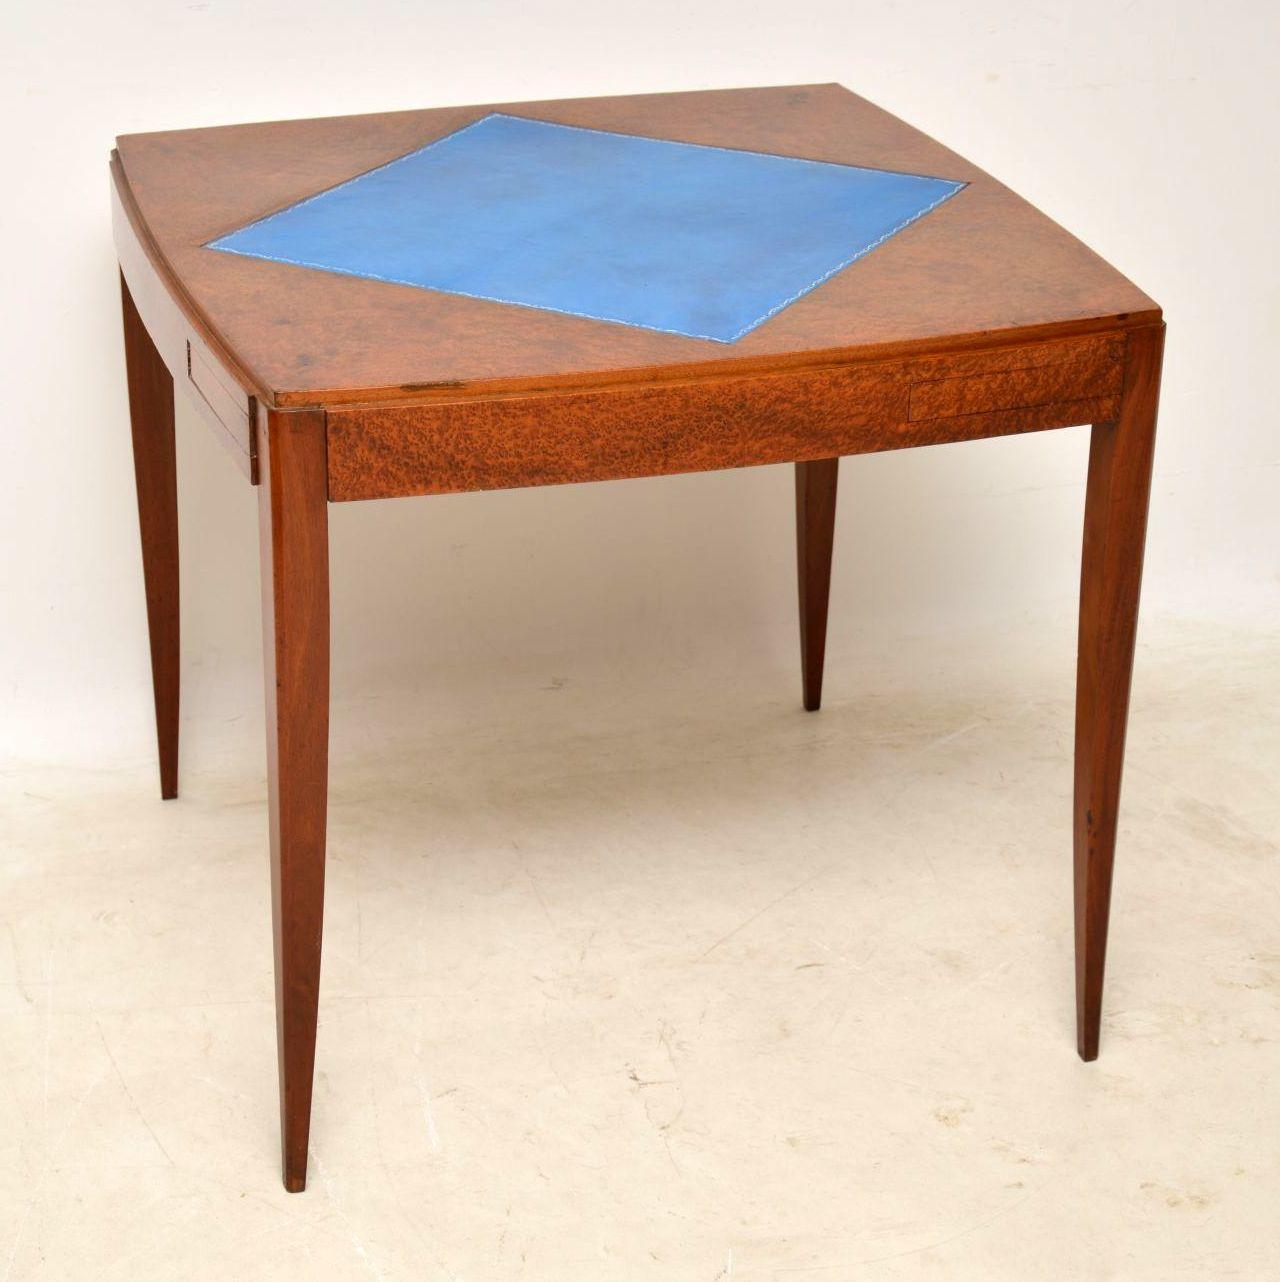 Very stylish Art Deco card table with a tooled leather playing surface and pull out compartments, which are possibly meant for money or chips. The wood used is very exotic and I believe it’s Amboyna. It’s a very unusual model and not one I’ve seen